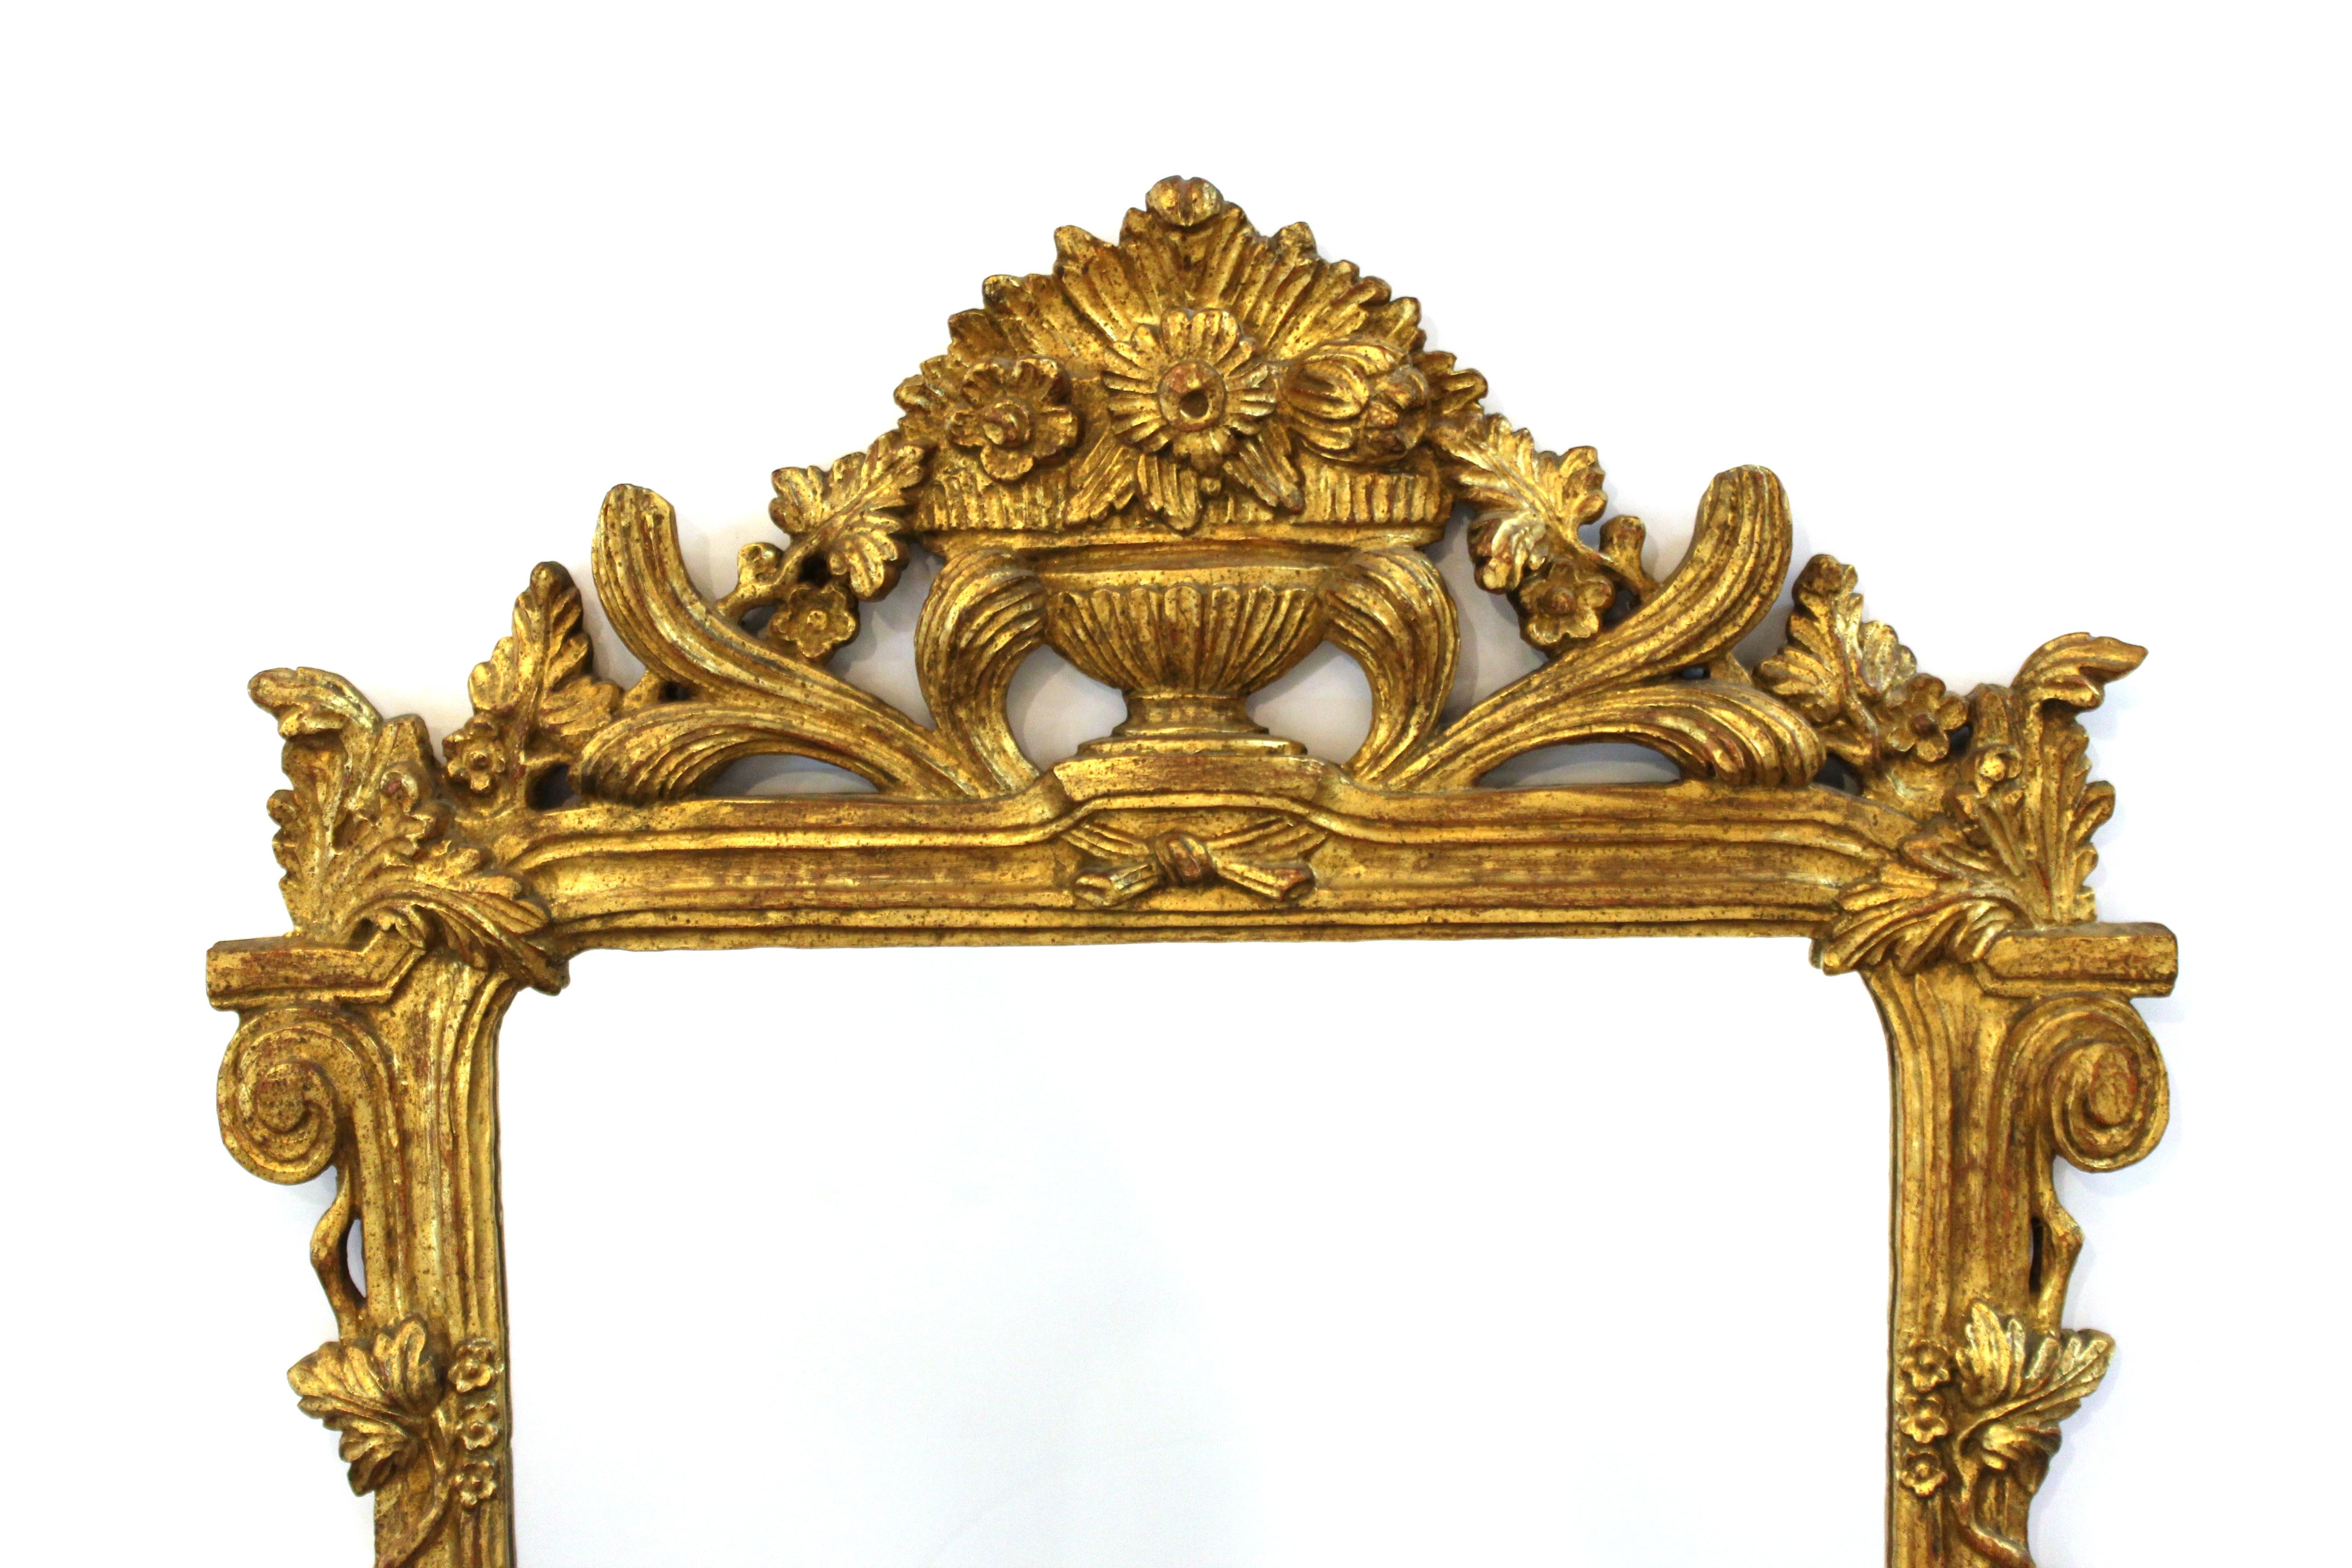 Italian Hollywood Regency mirror with elaborately carved neoclassical revival style gilt frame. The piece has a label on the back marked 'Made In Italy' and is in great vintage condition with age-appropriate wear.